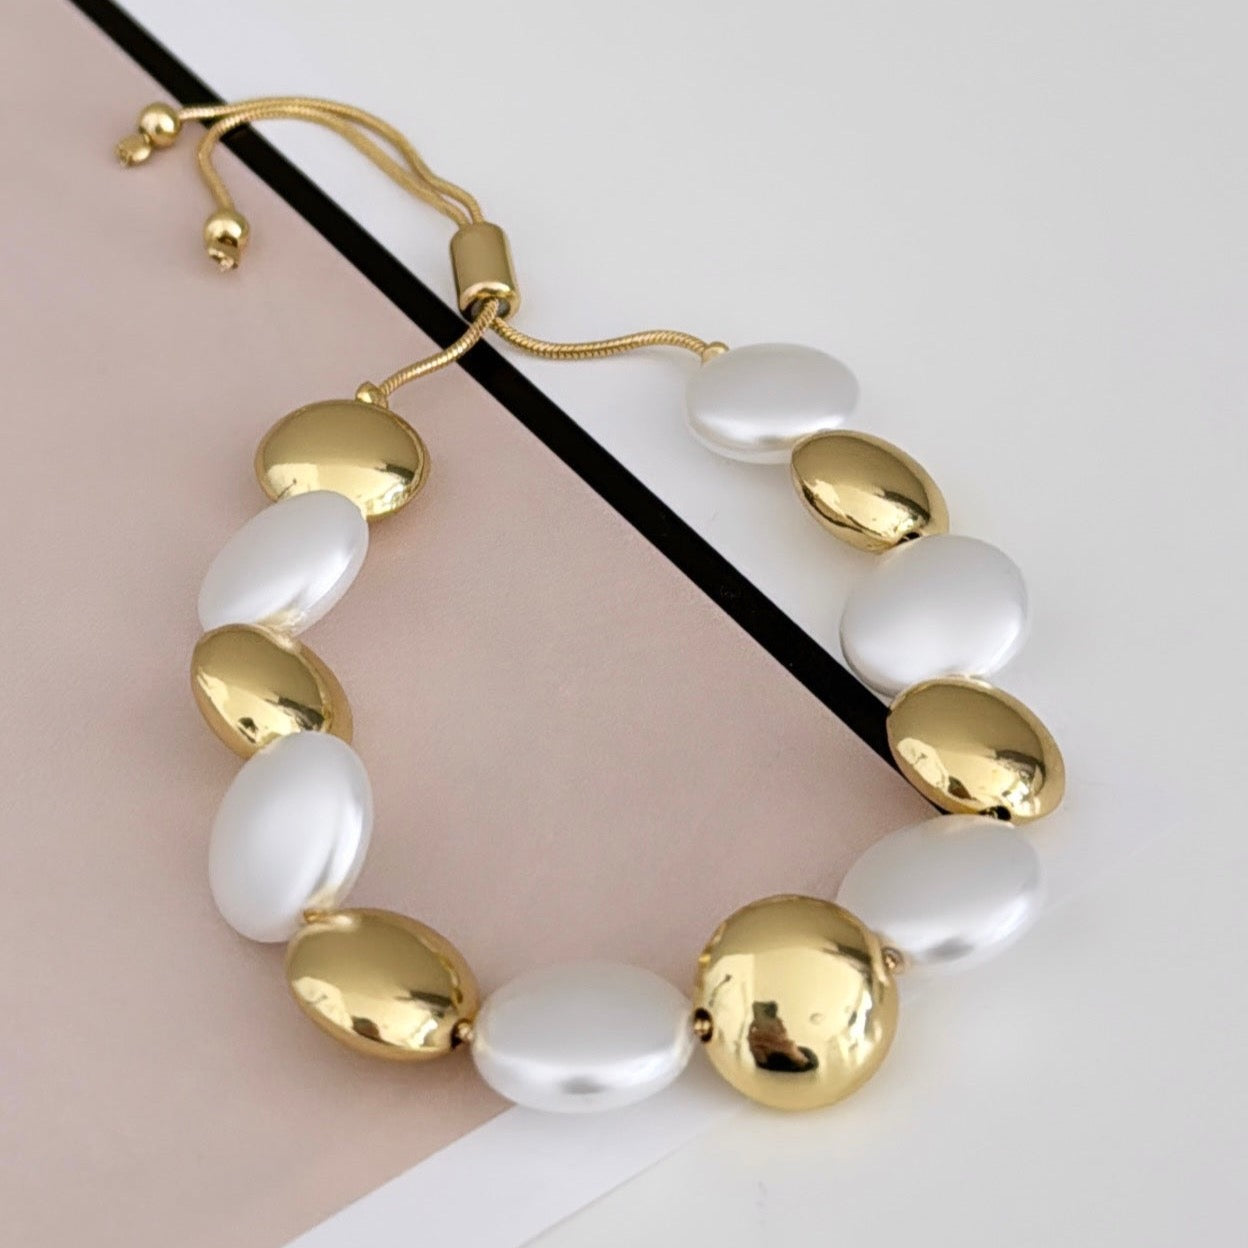 Pearls and Gold Bead Bracelet